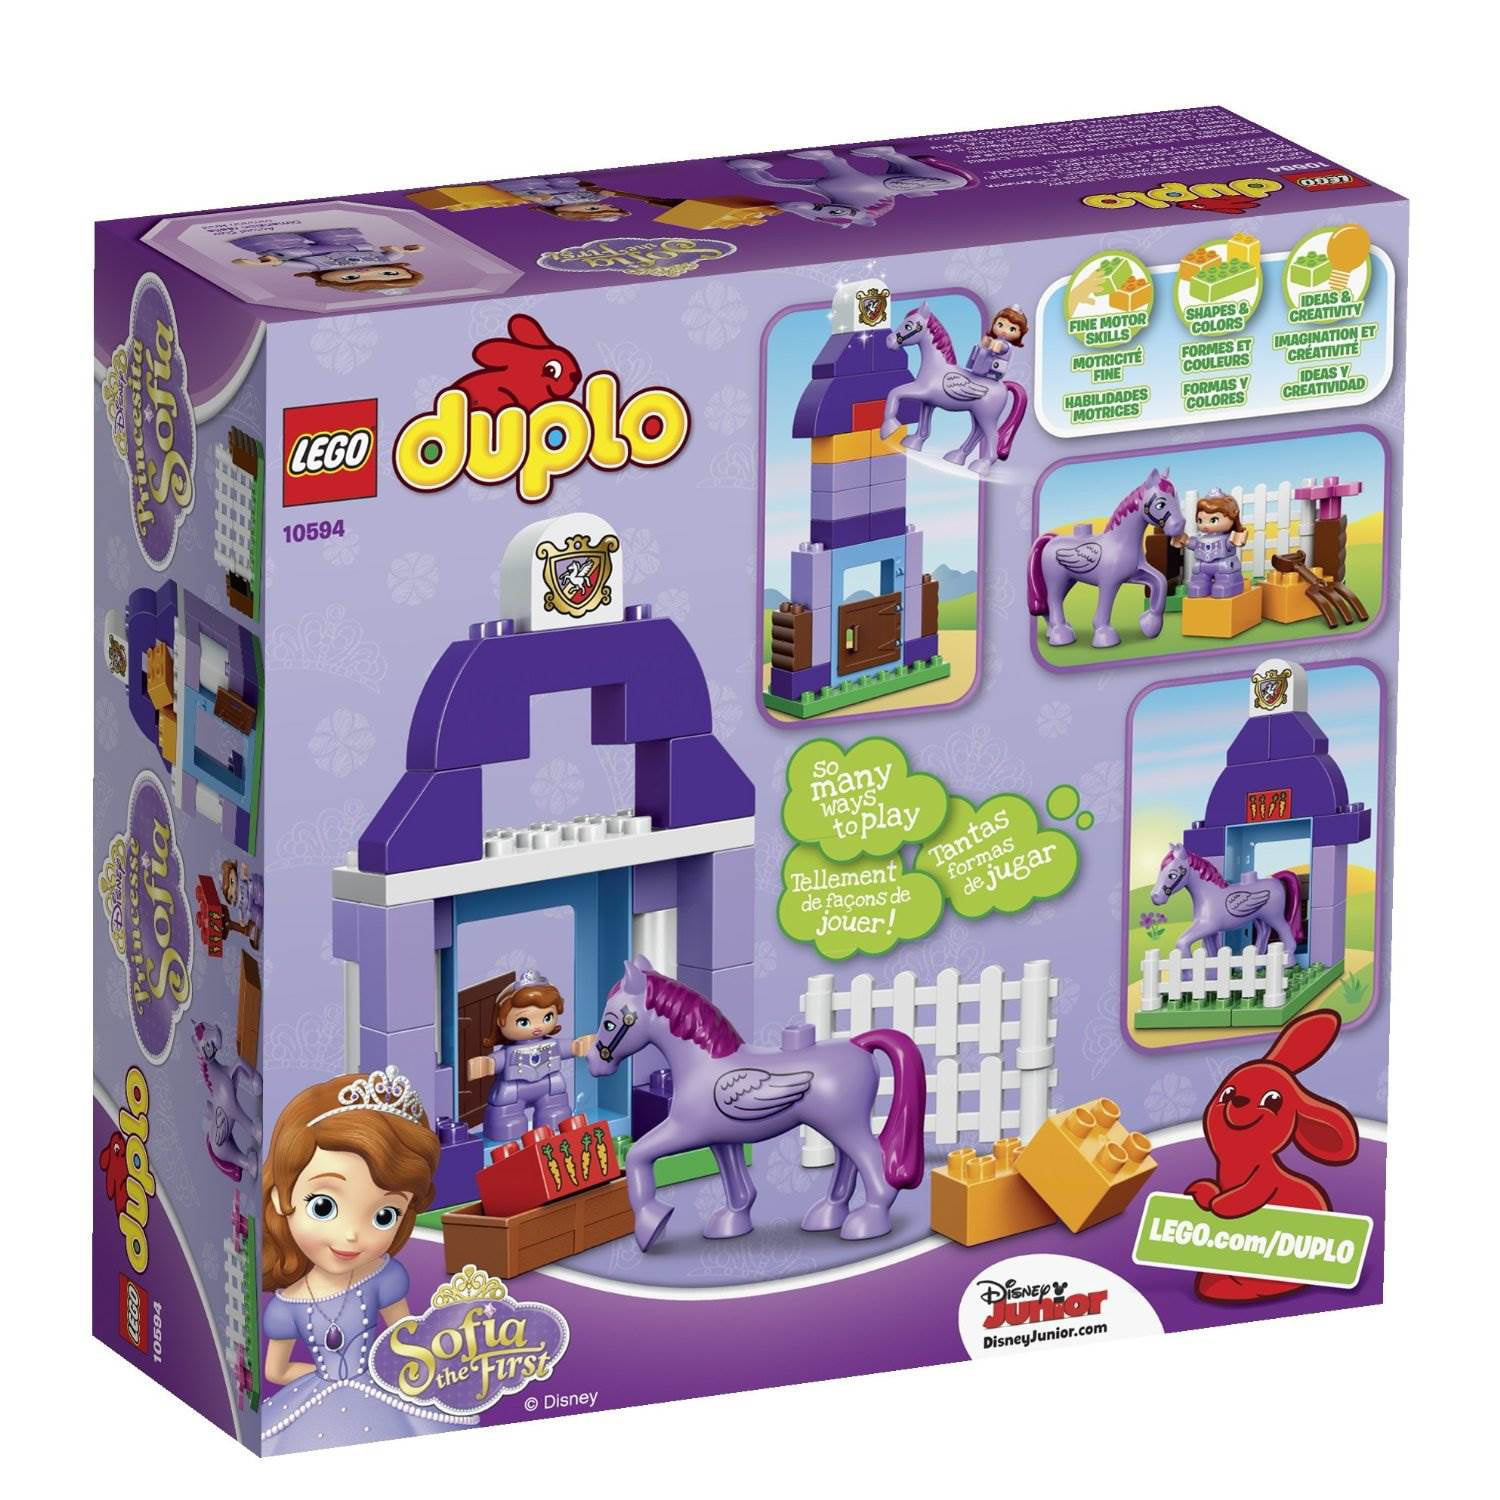 LEGO DUPLO Sofia the First First Stable - Walmart.com